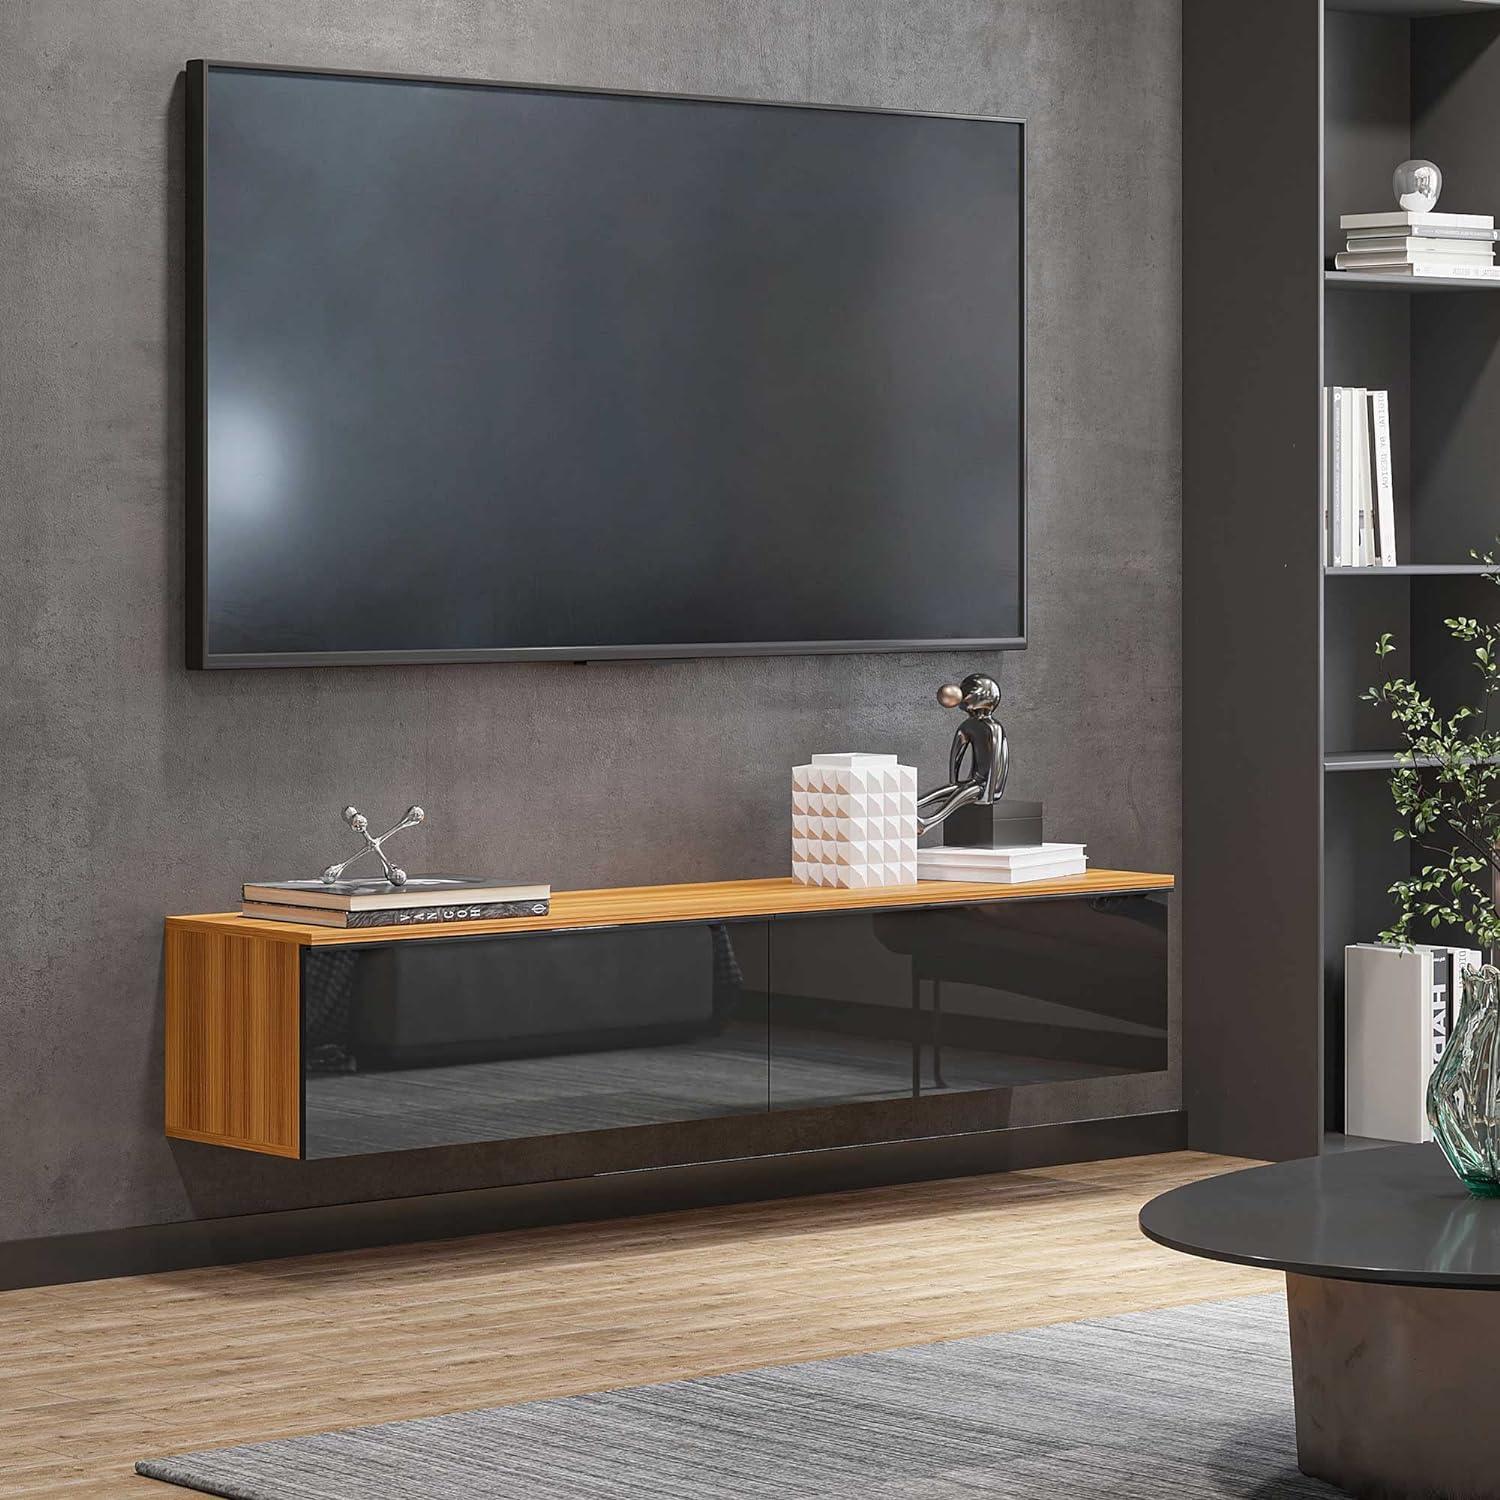 Wall-Mounted High Gloss Floating TV Stand Cabinet with Storage, Brown and Black, Fits TVs up to 70 - Furniture4Design